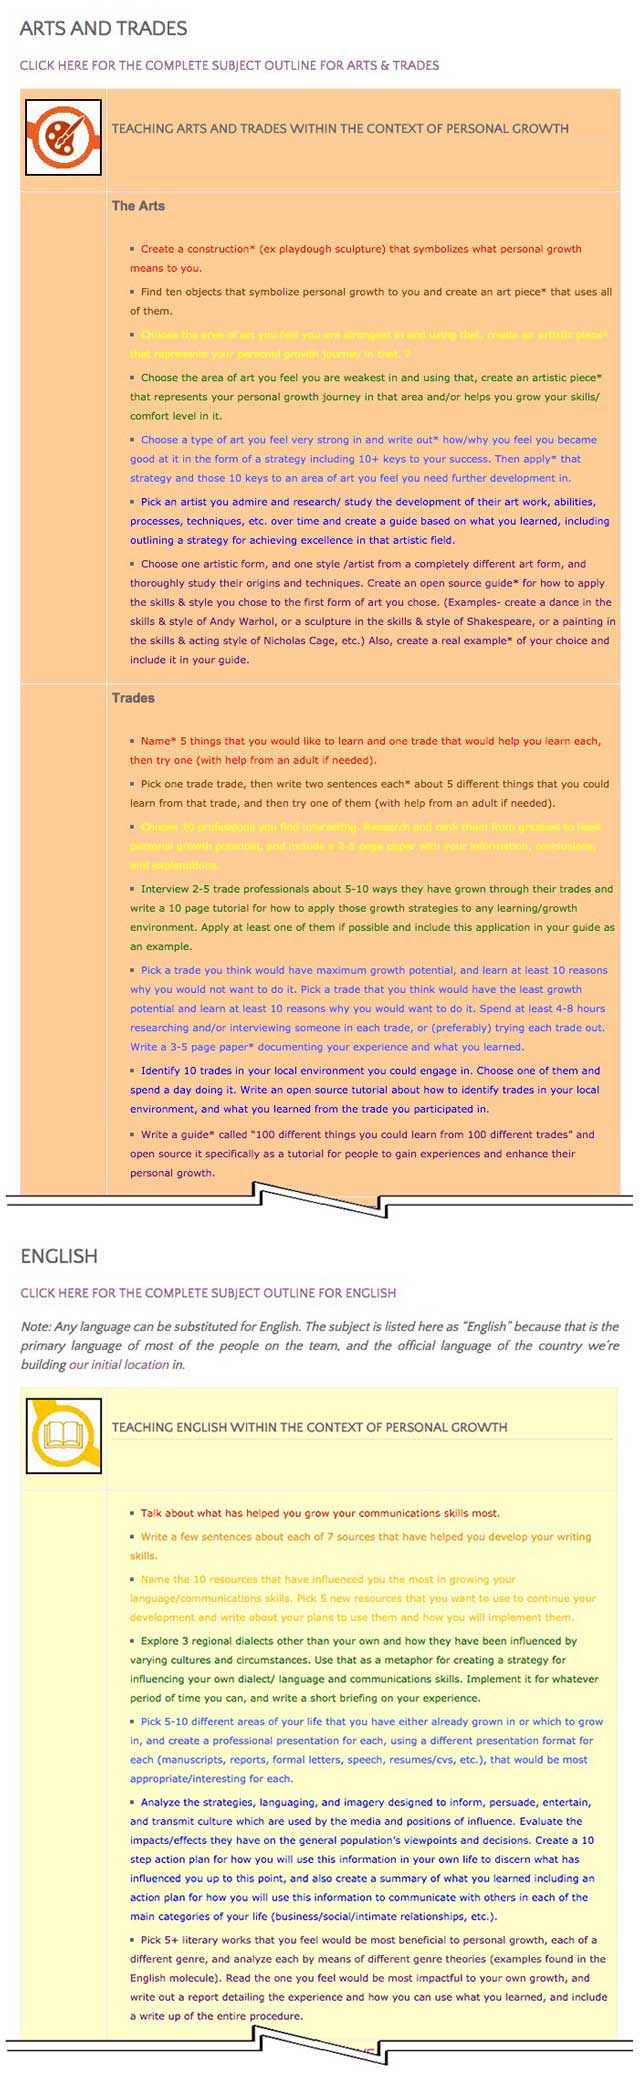 personal-growth-lesson-plan-25-b182-640, This last week the core team transferred the first 25% of the written content for the Personal Growth Lesson Plan to the website, as you see here. This lesson plan purposed to teach all subjects, to all learning levels, in any learning environment, using the central theme of “Personal Growth” is now 25% completed on our website.